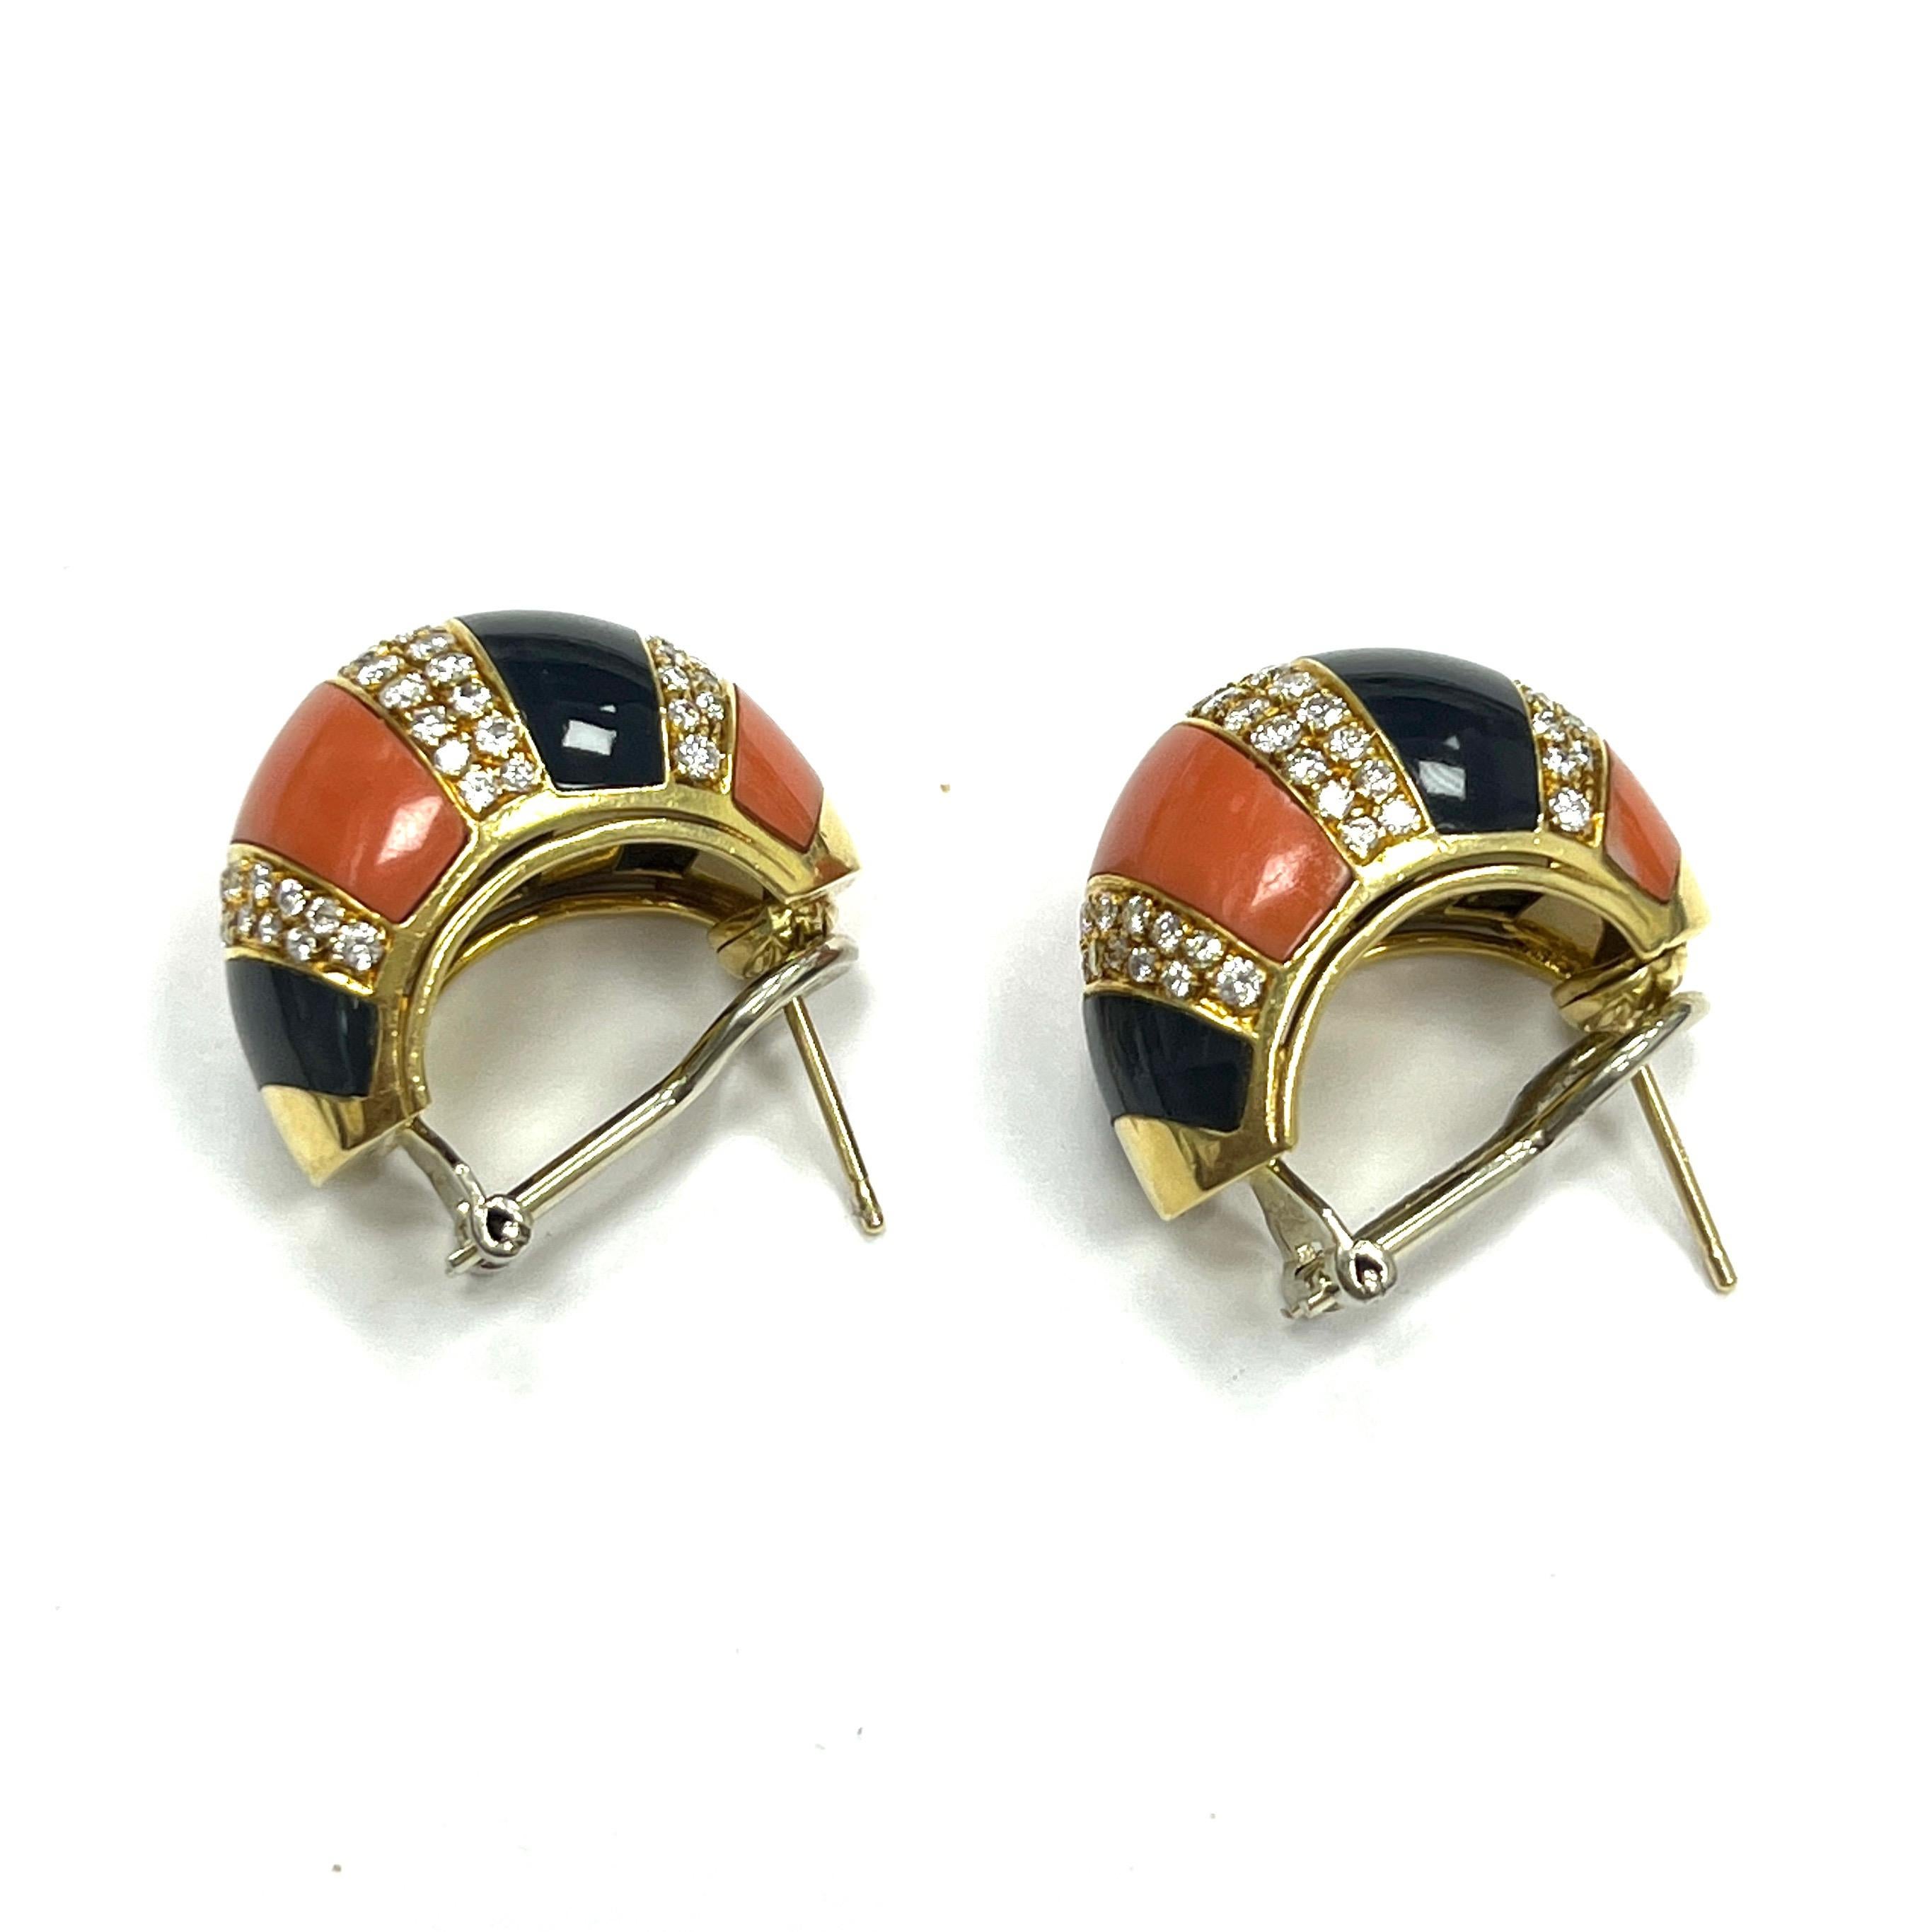 Fred Paris Coral Black Onyx Diamond Gold Earrings For Sale 1